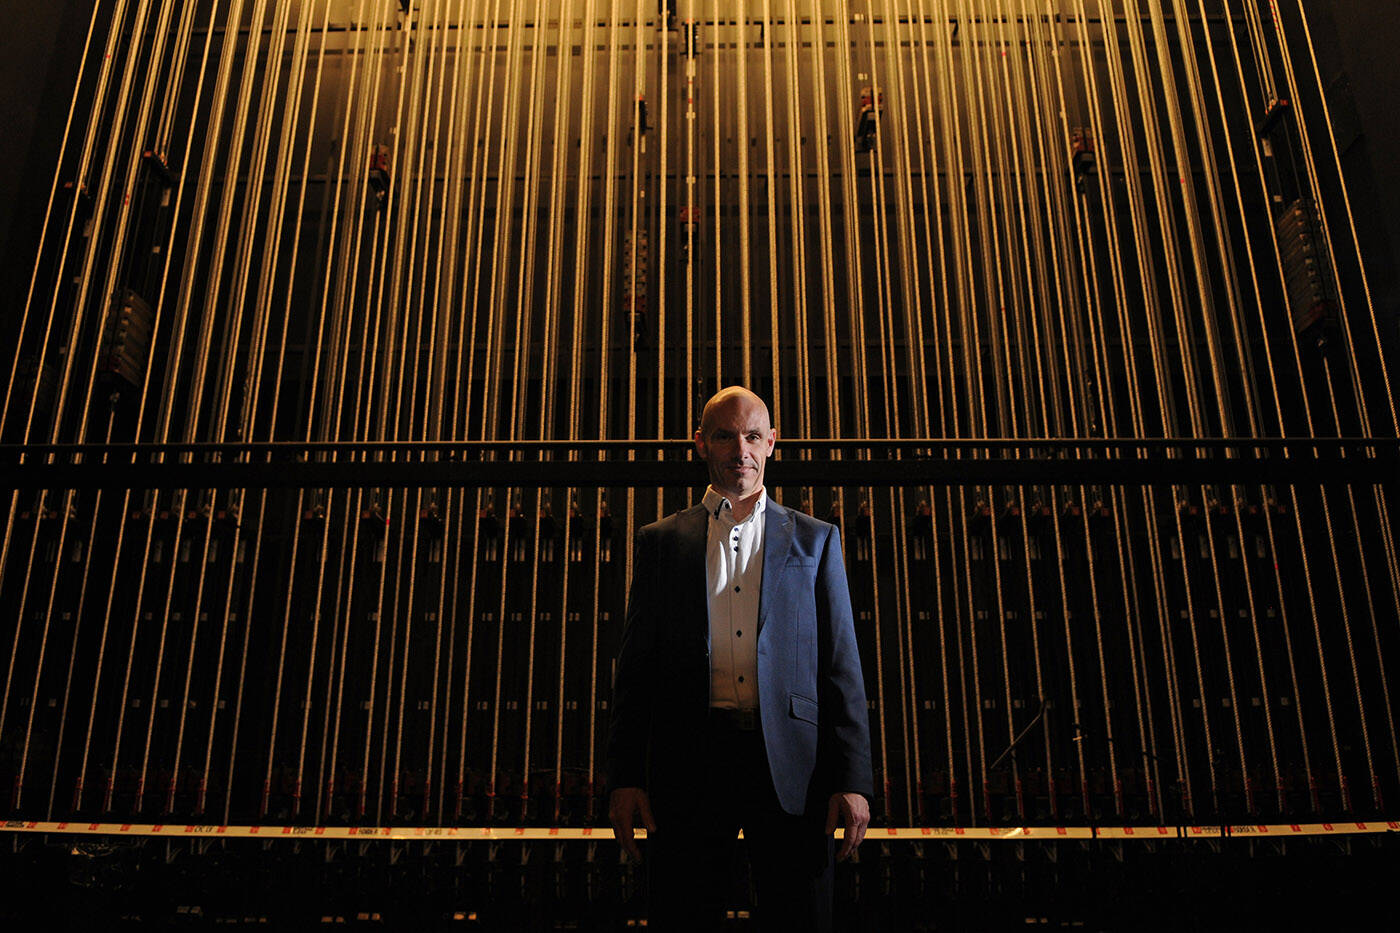 Newly hired executive director of the Chilliwack Cultural Centre, Jean-Louis Bleau, is seen backstage in front of dozens of ropes and pulleys at the Hub International Theatre inside the centre on Tuesday, Oct. 25, 2022. (Jenna Hauck/ Chilliwack Progress)